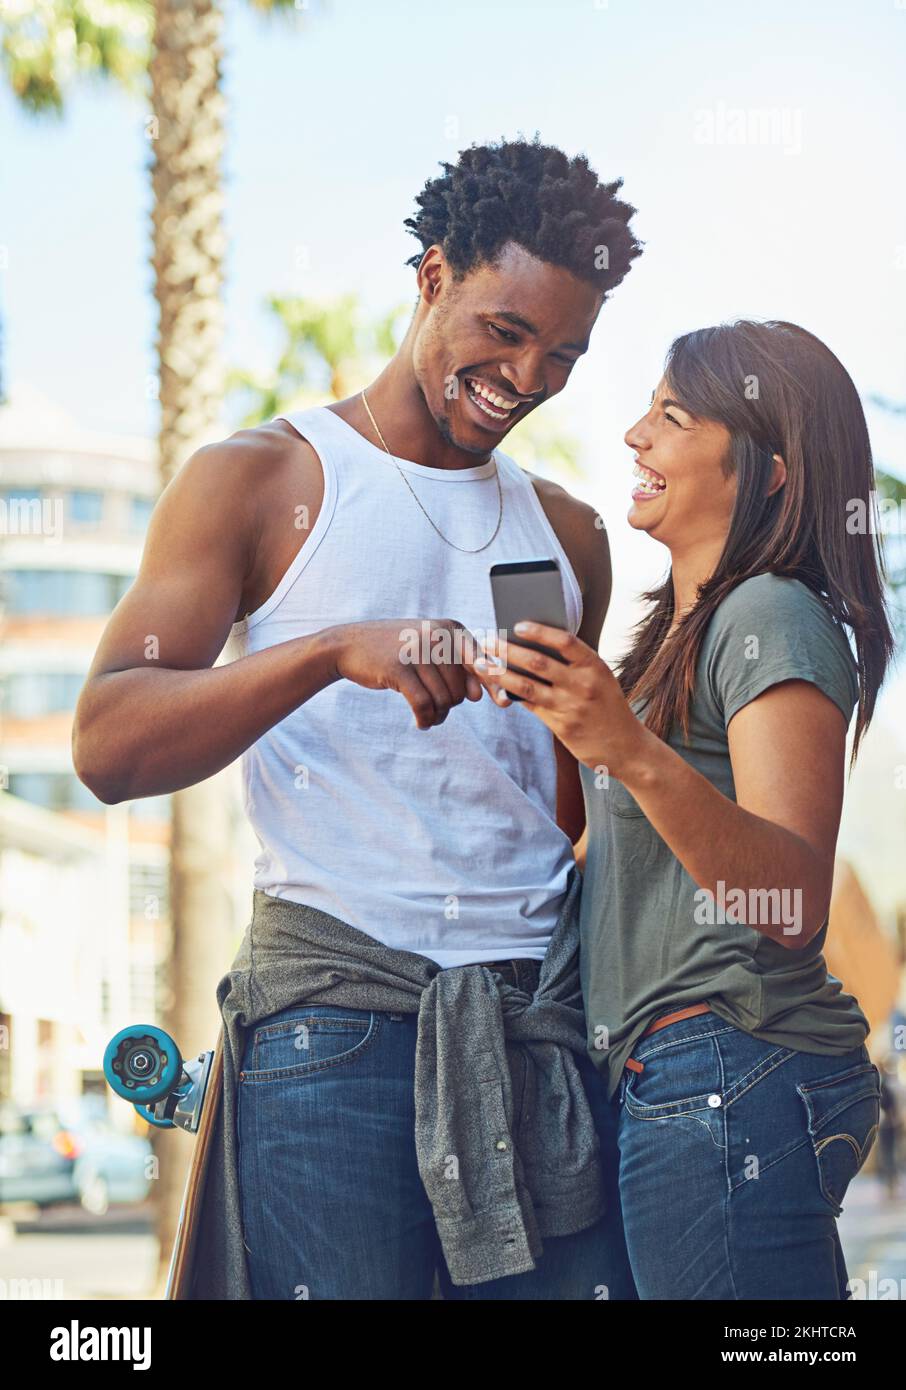 Happy, smile and couple on a phone in city watching a comic, comedy or funny video on social media. Happiness, love and interracial man and woman Stock Photo